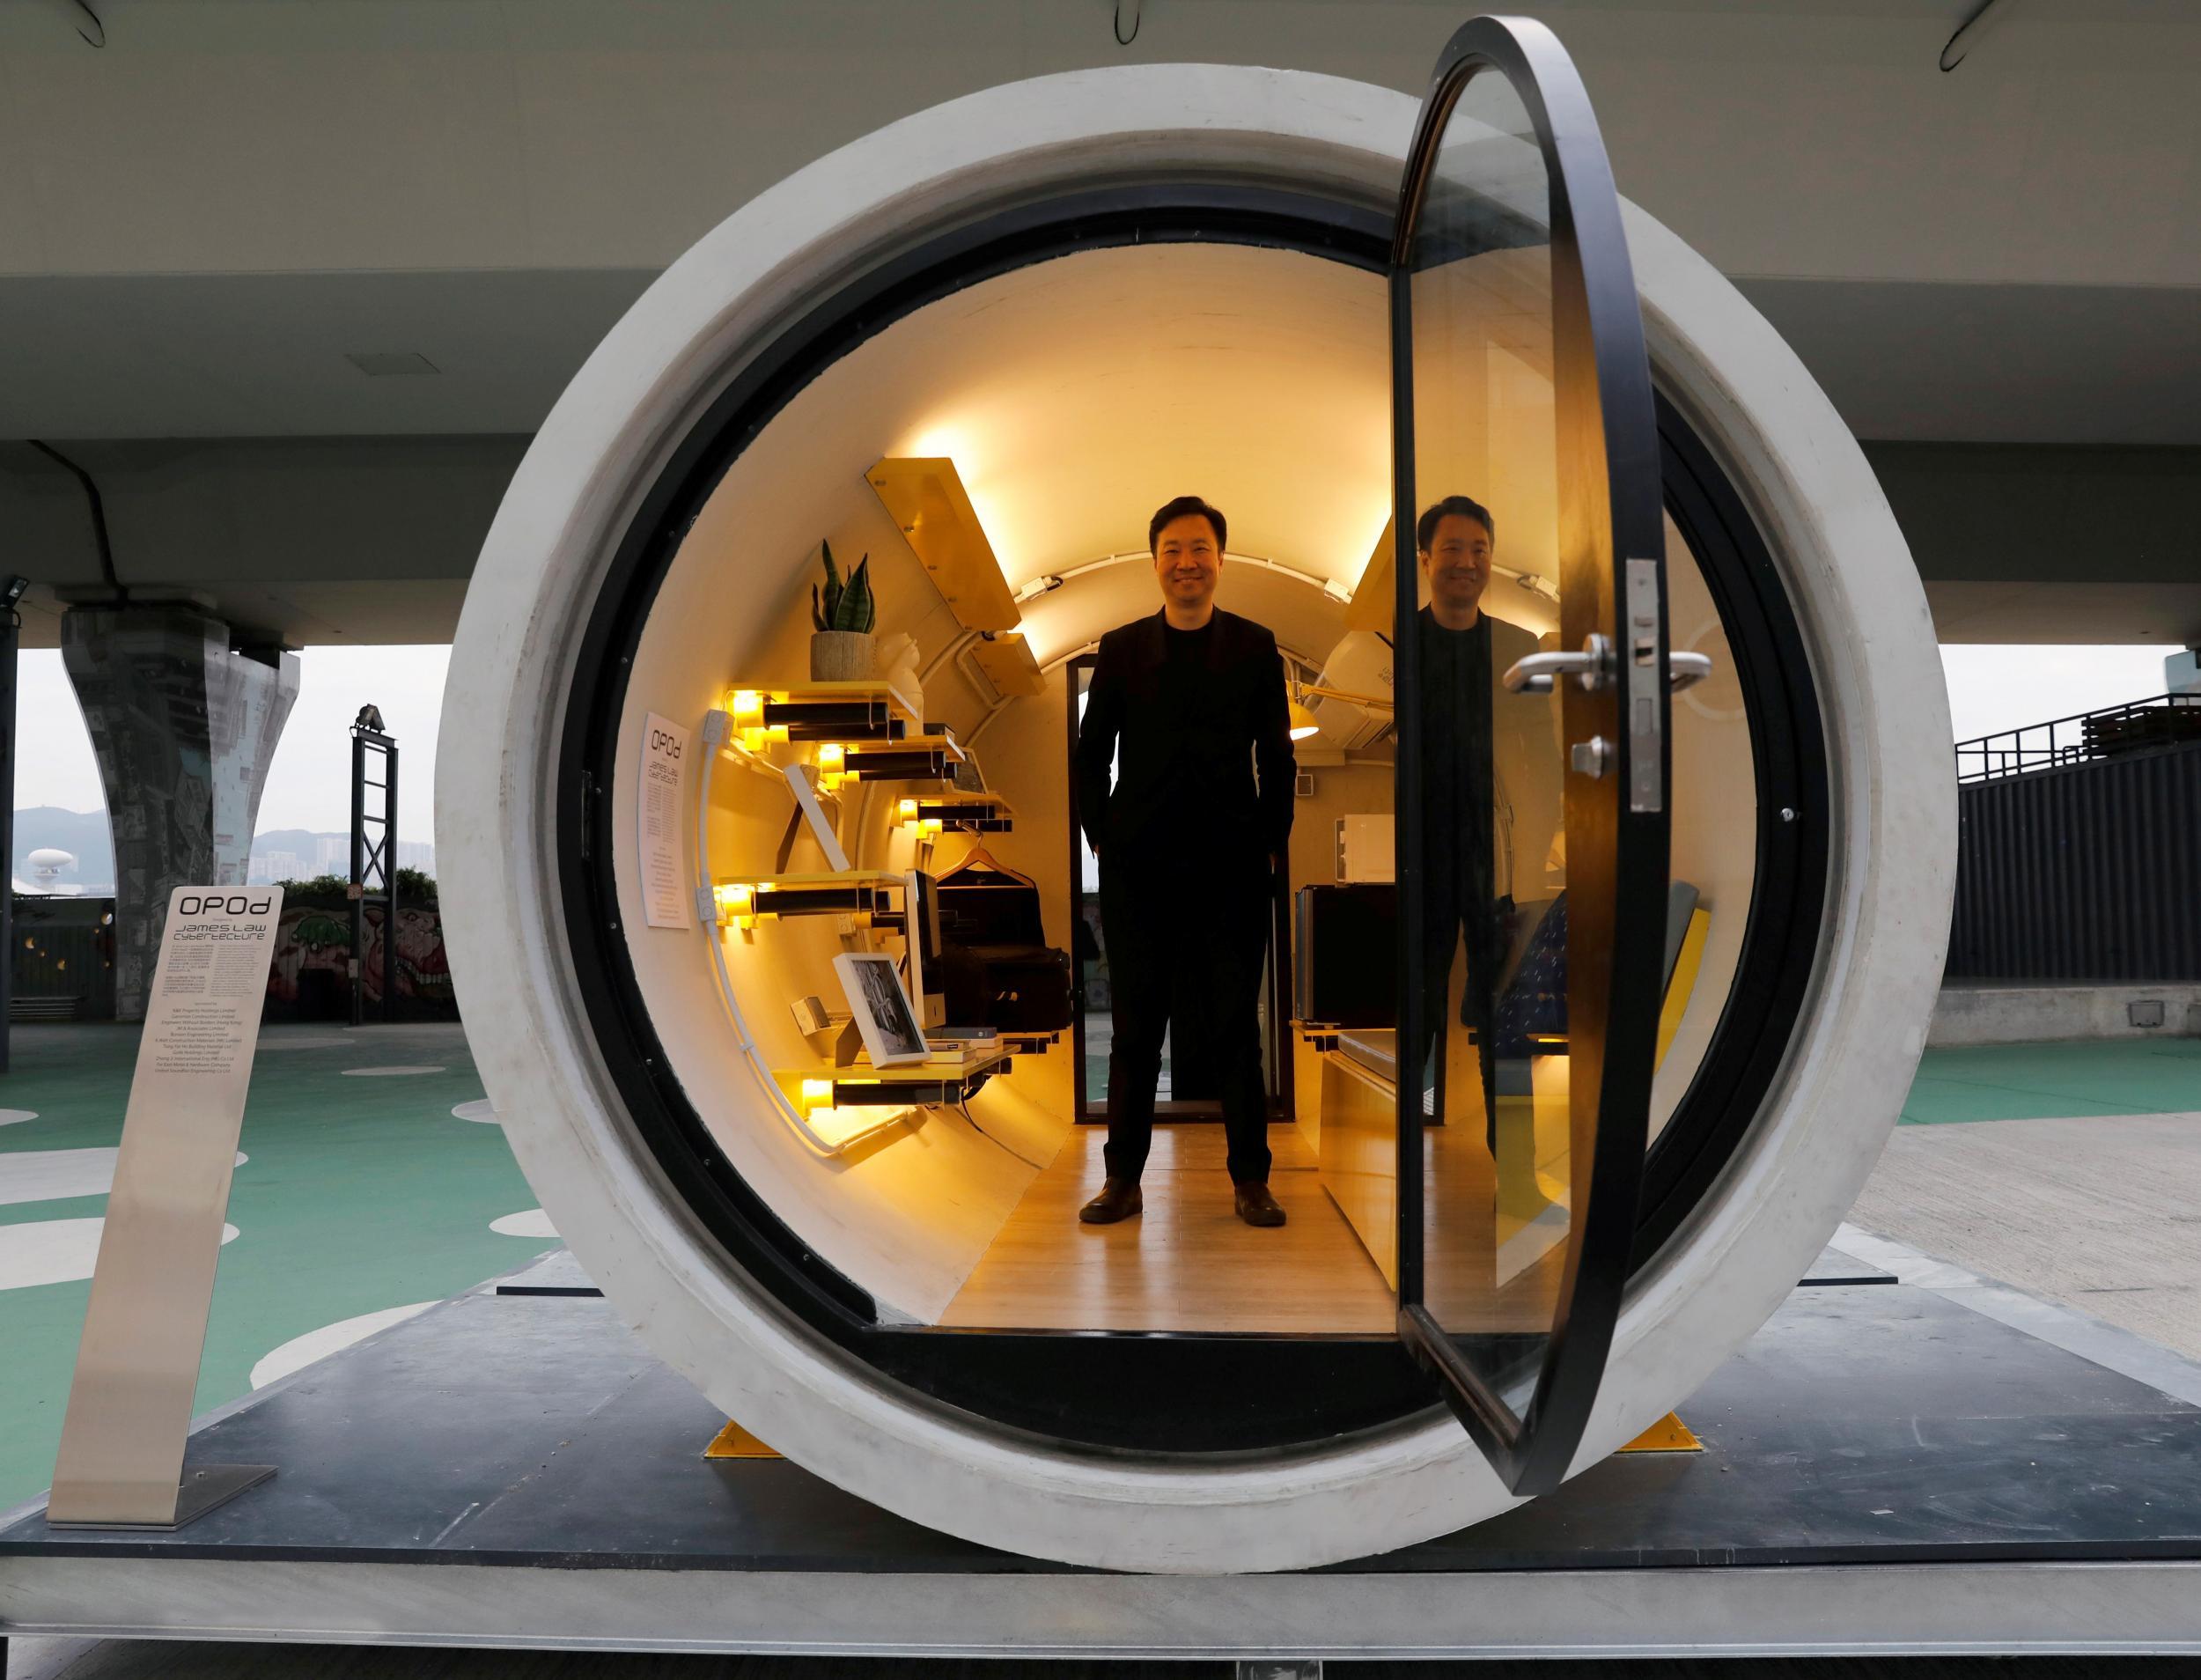 Architect James Law stands in his ‘OPod’: a 120-square-foot giant water pipe designed as micro-housing in Hong Kong